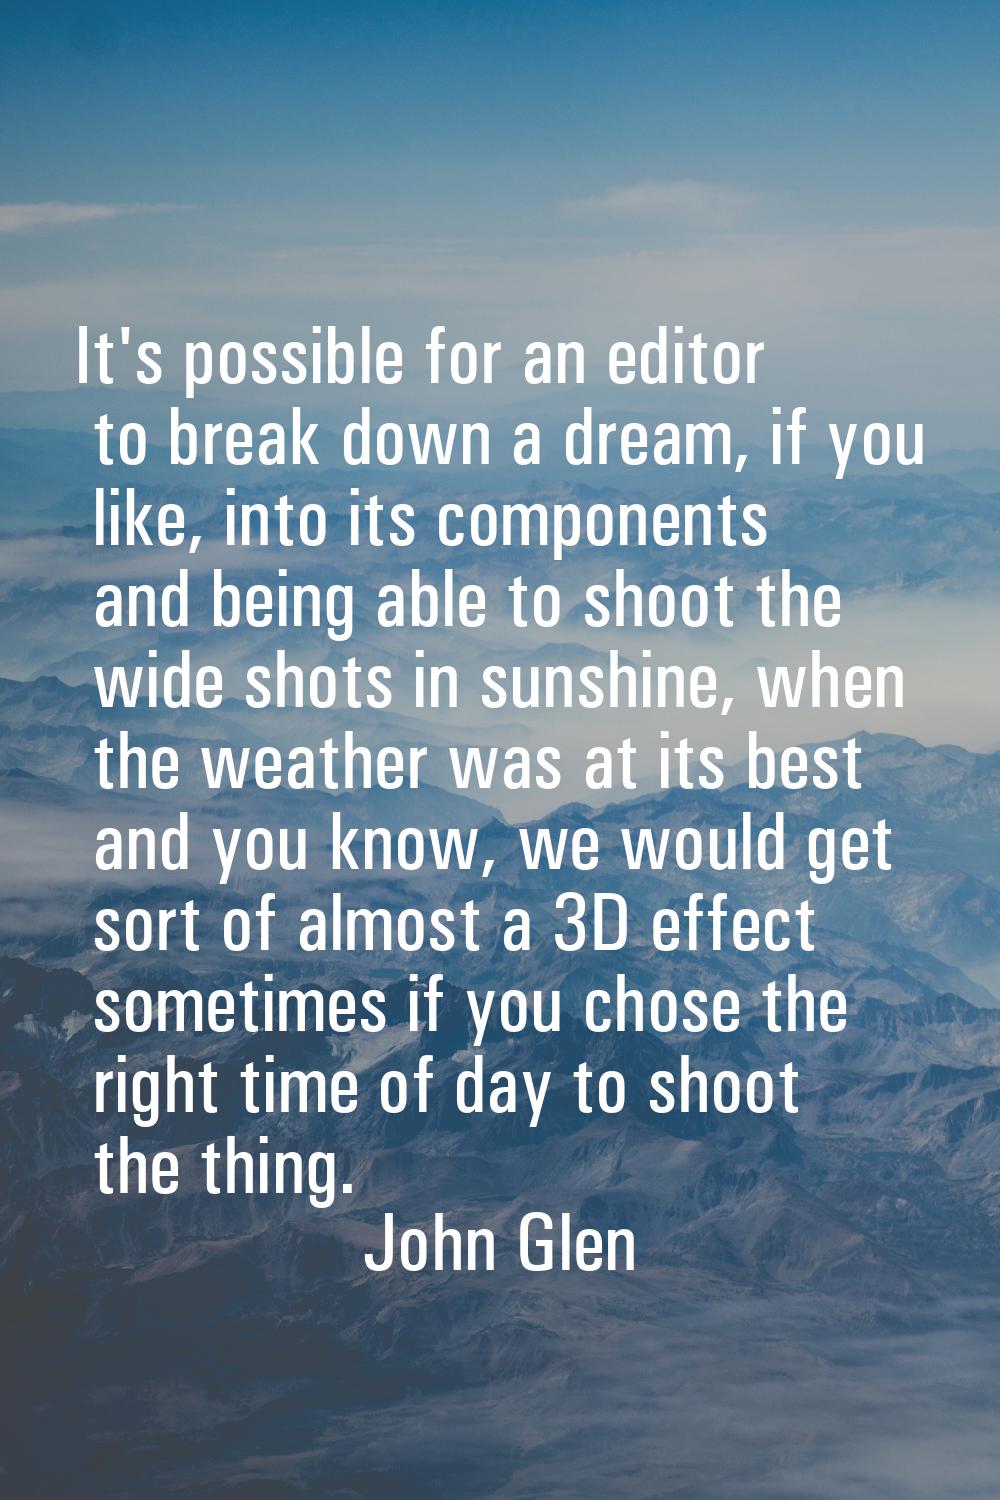 It's possible for an editor to break down a dream, if you like, into its components and being able 